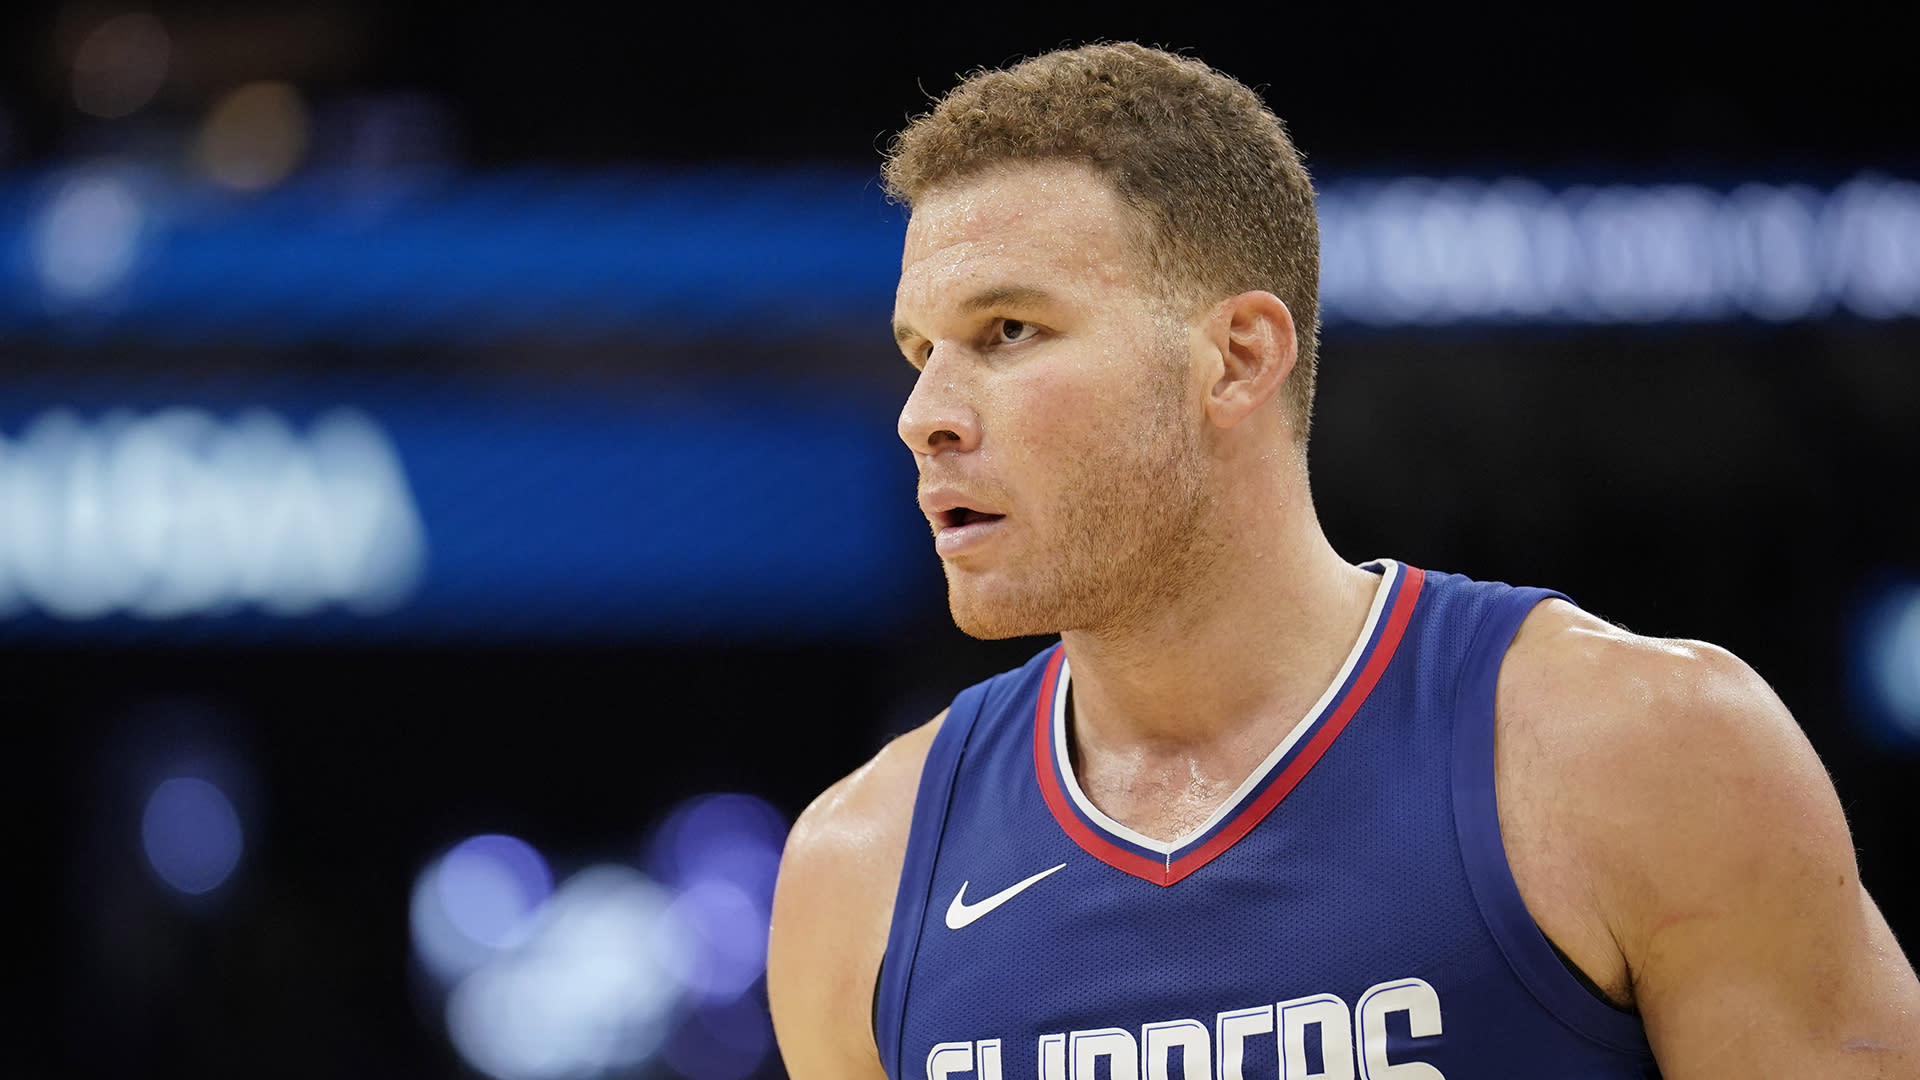 Blake Griffin on wrong end of highlight in Pistons' opener - Yahoo Sports